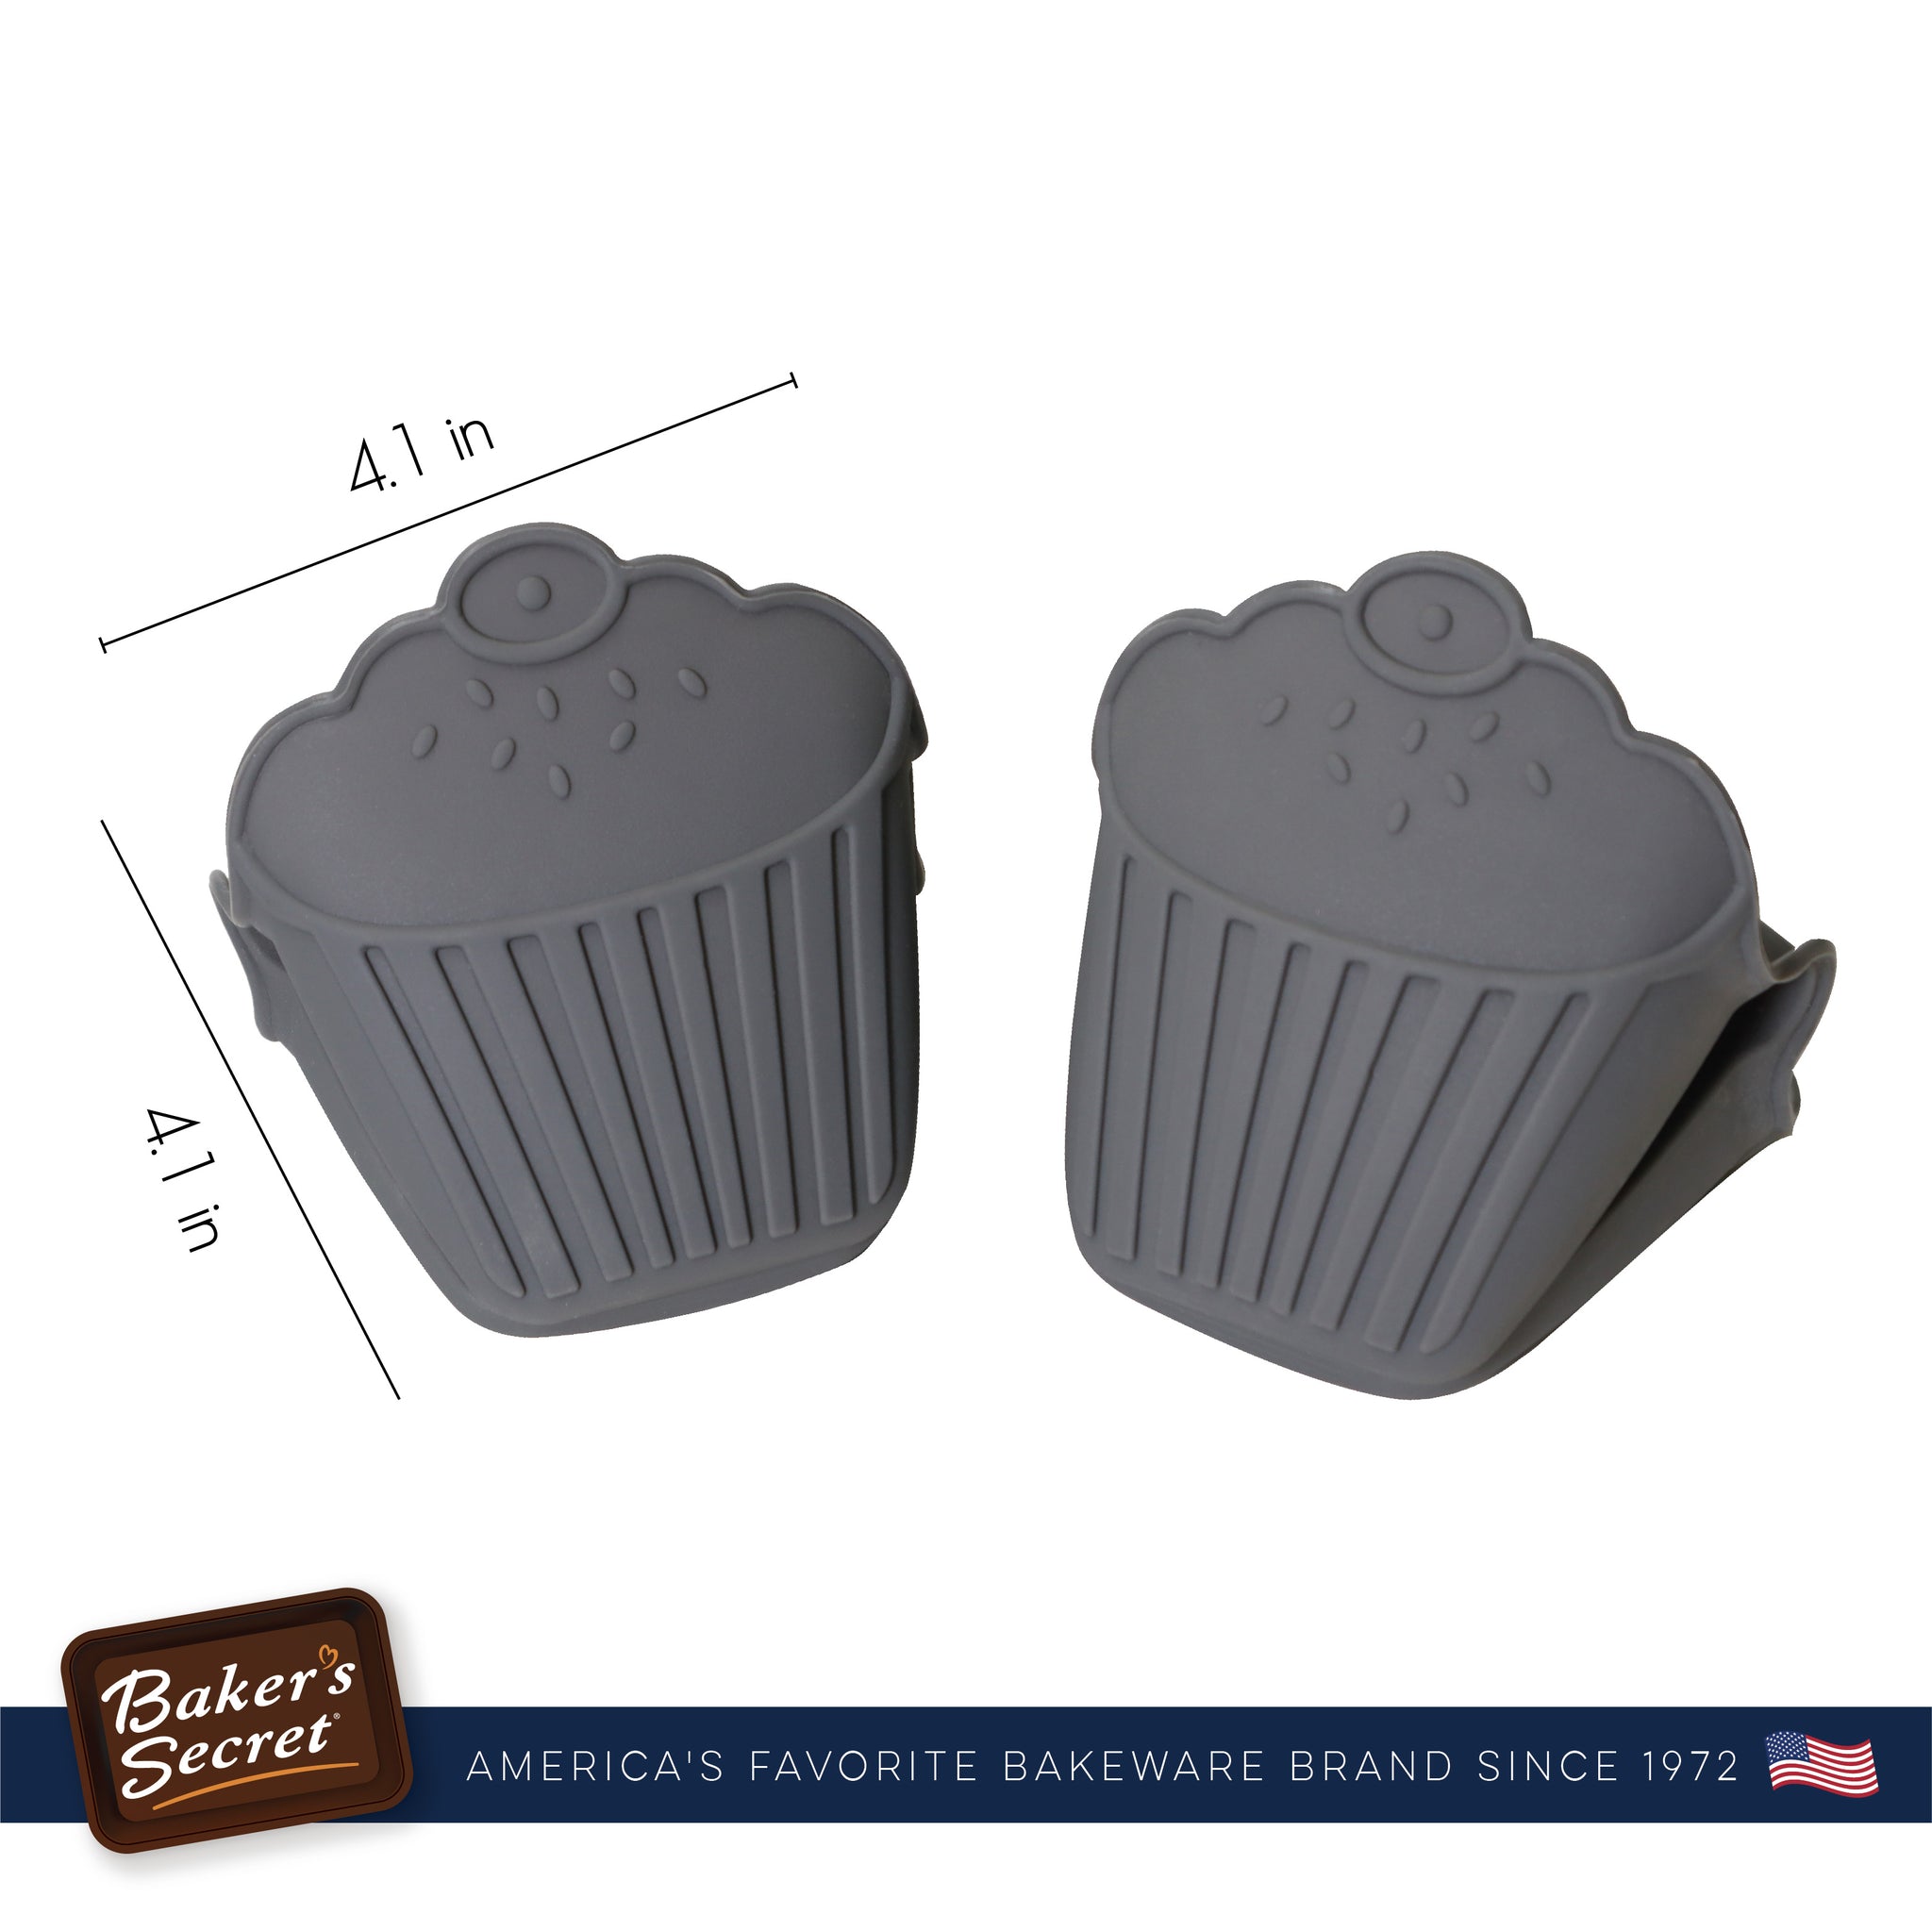 Cupcake Silicone Oven Mitts  Cookware Accessories - Baker's Secret